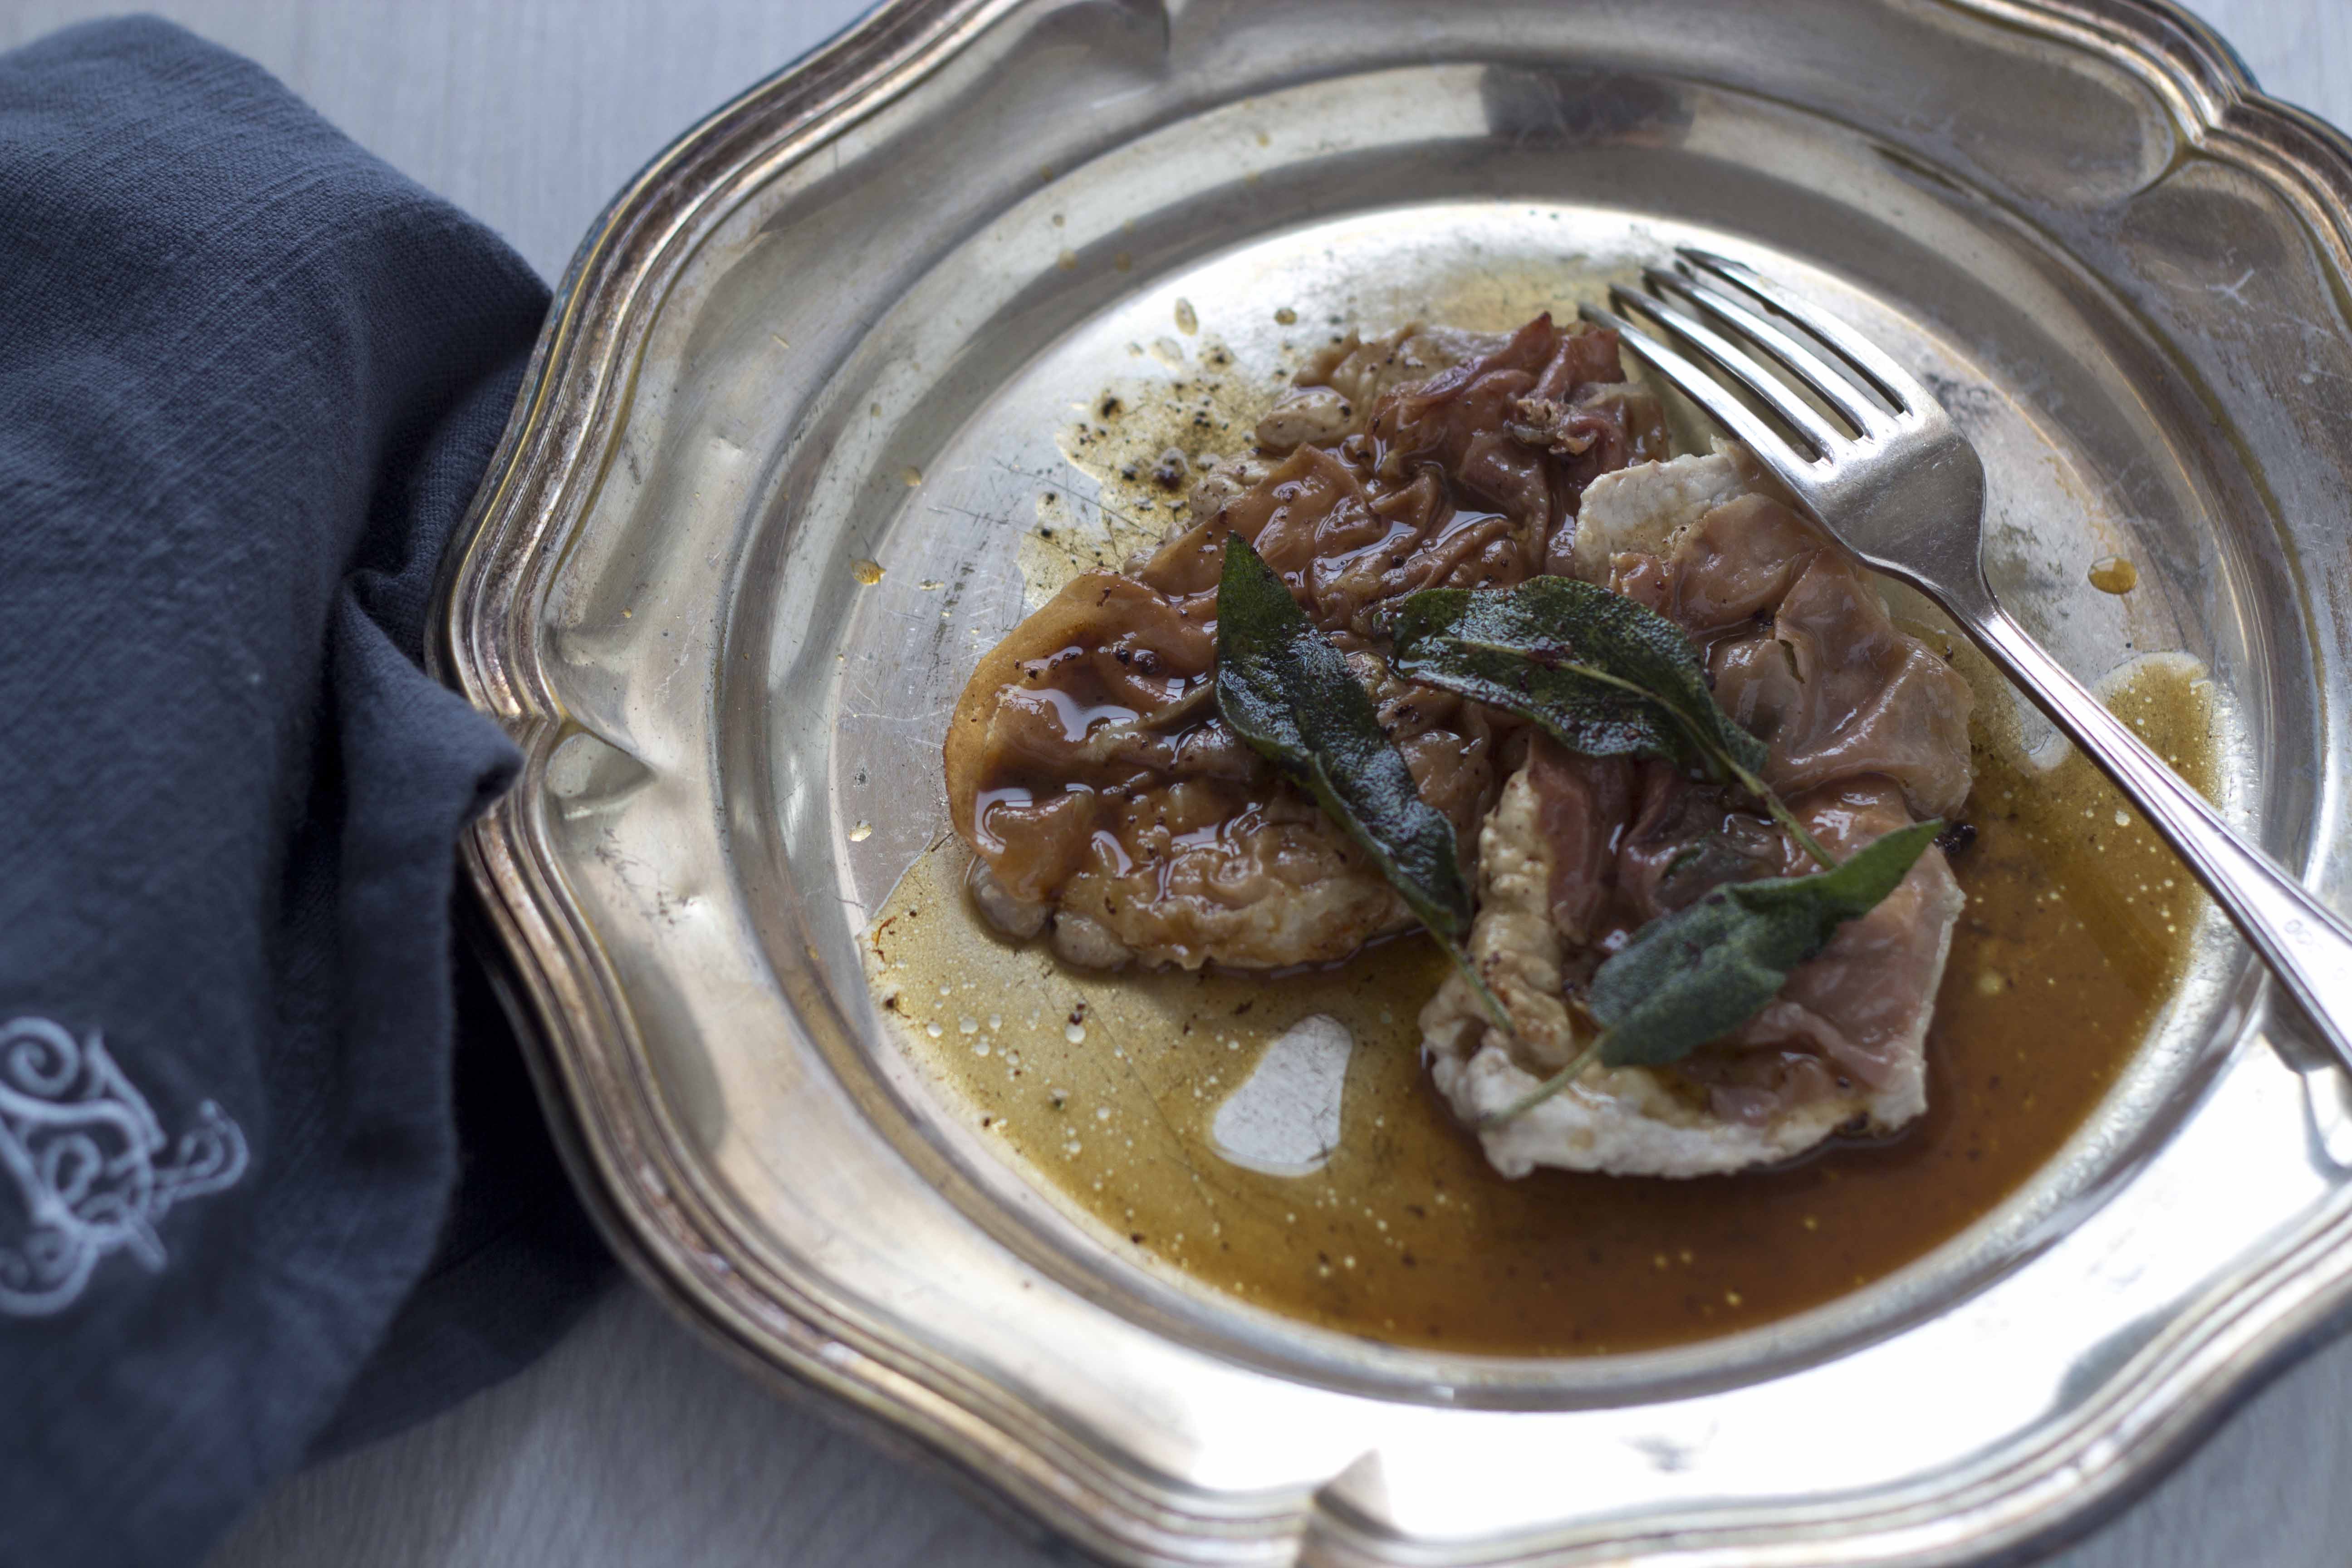 Saltimbocca alla romana (veal escalopes with sage and proscuitto) is ...